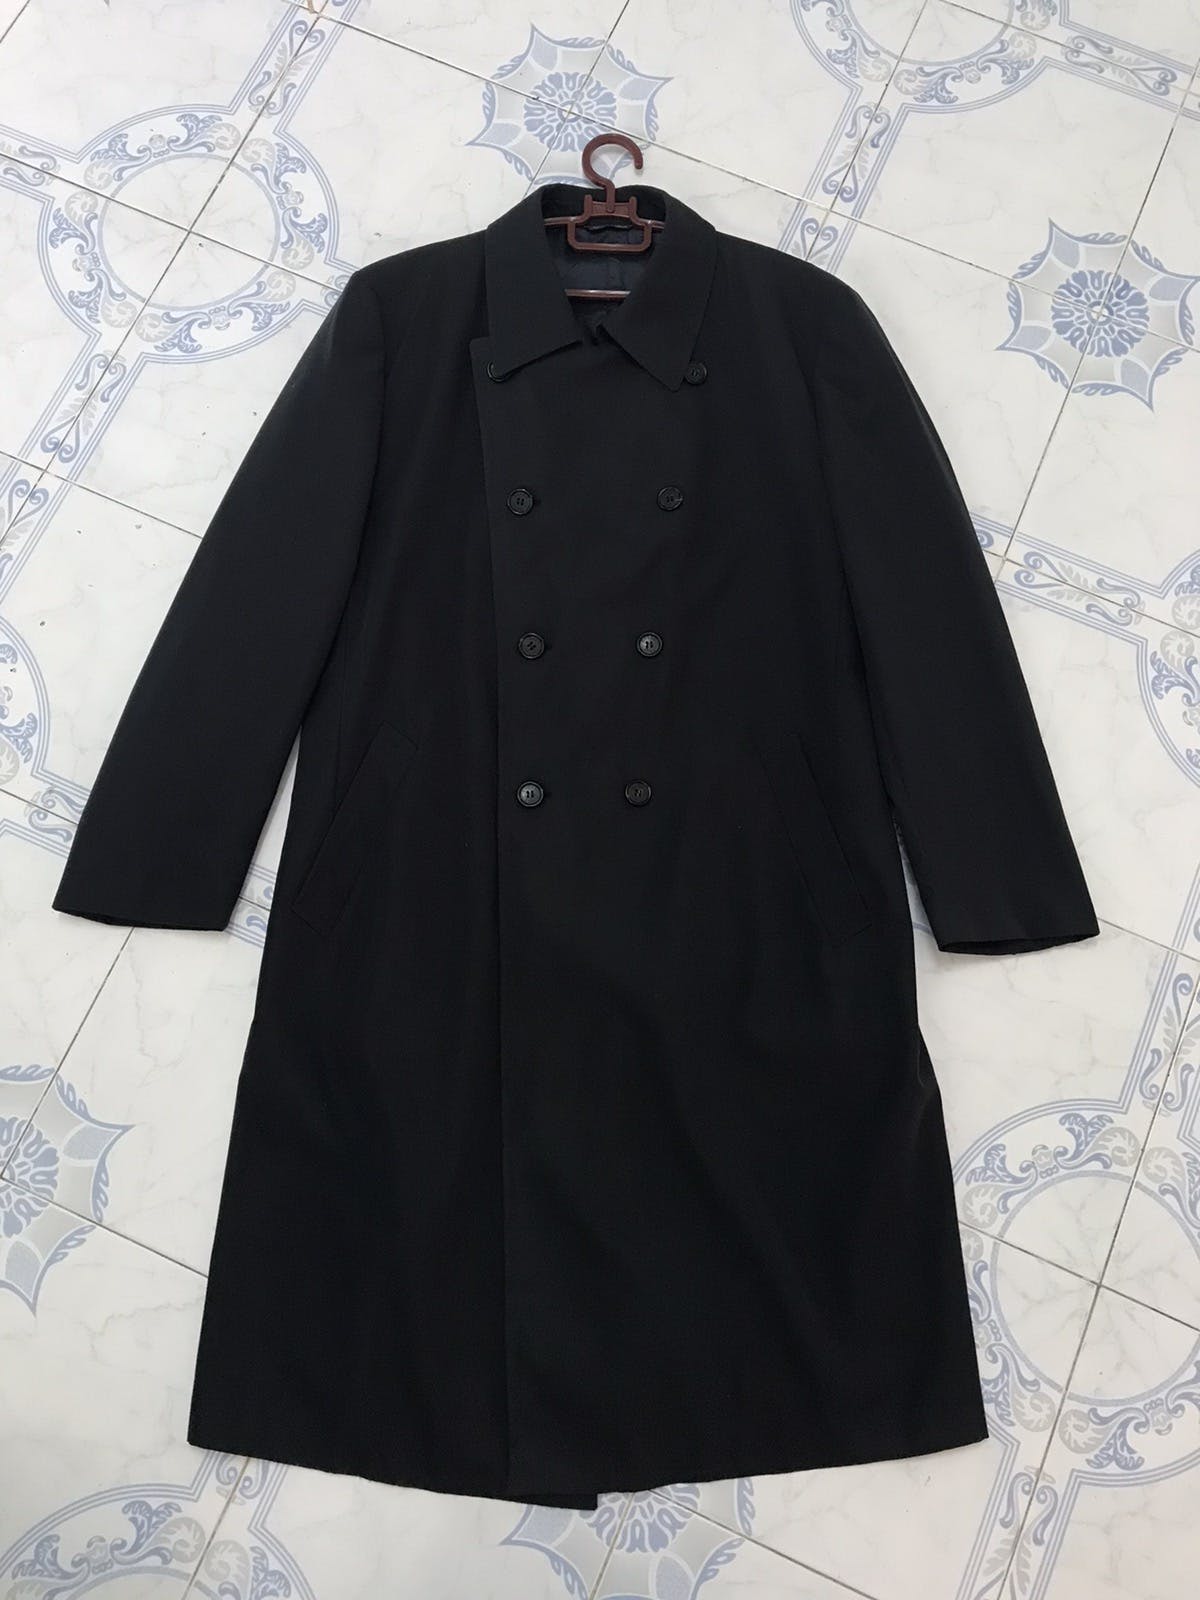 Gucci Long Coat/Jacket Made in Italy - 14